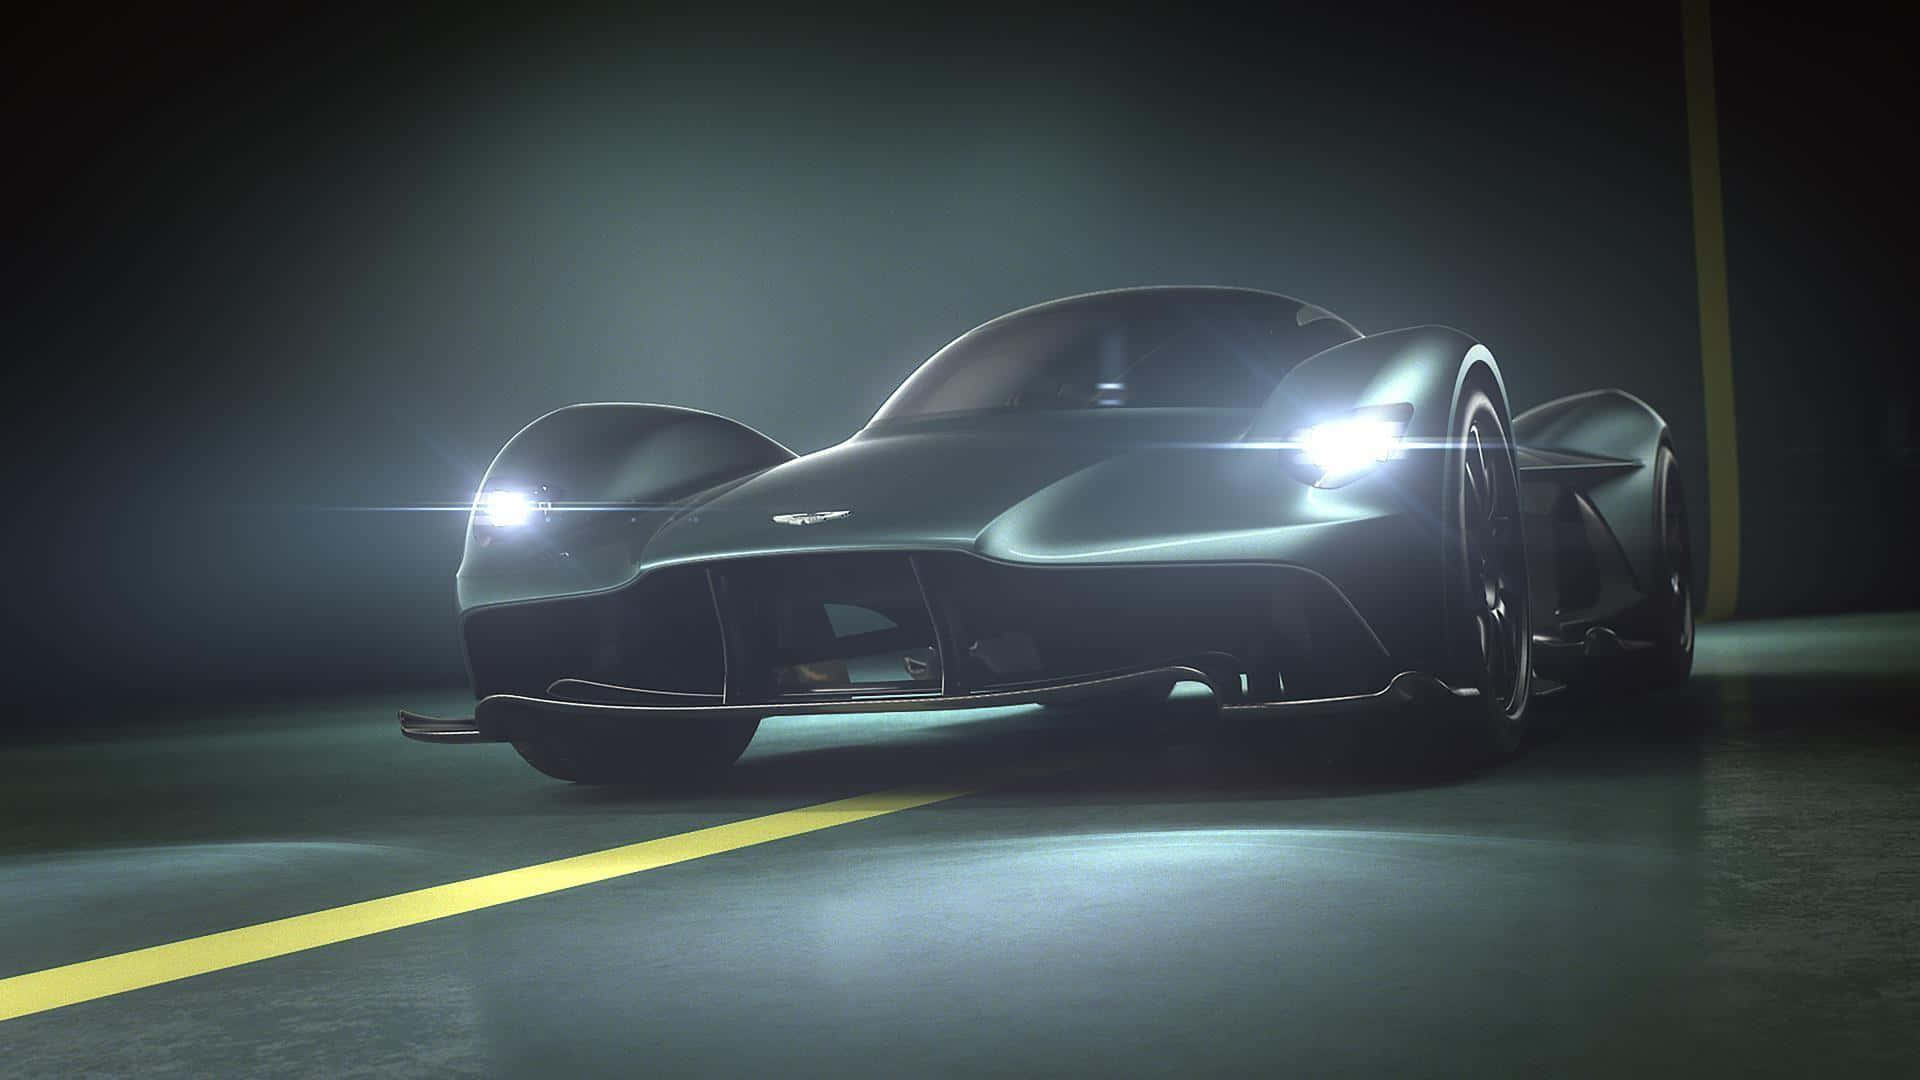 Aston Martin Valkyrie - A Masterpiece of Design and Engineering Wallpaper